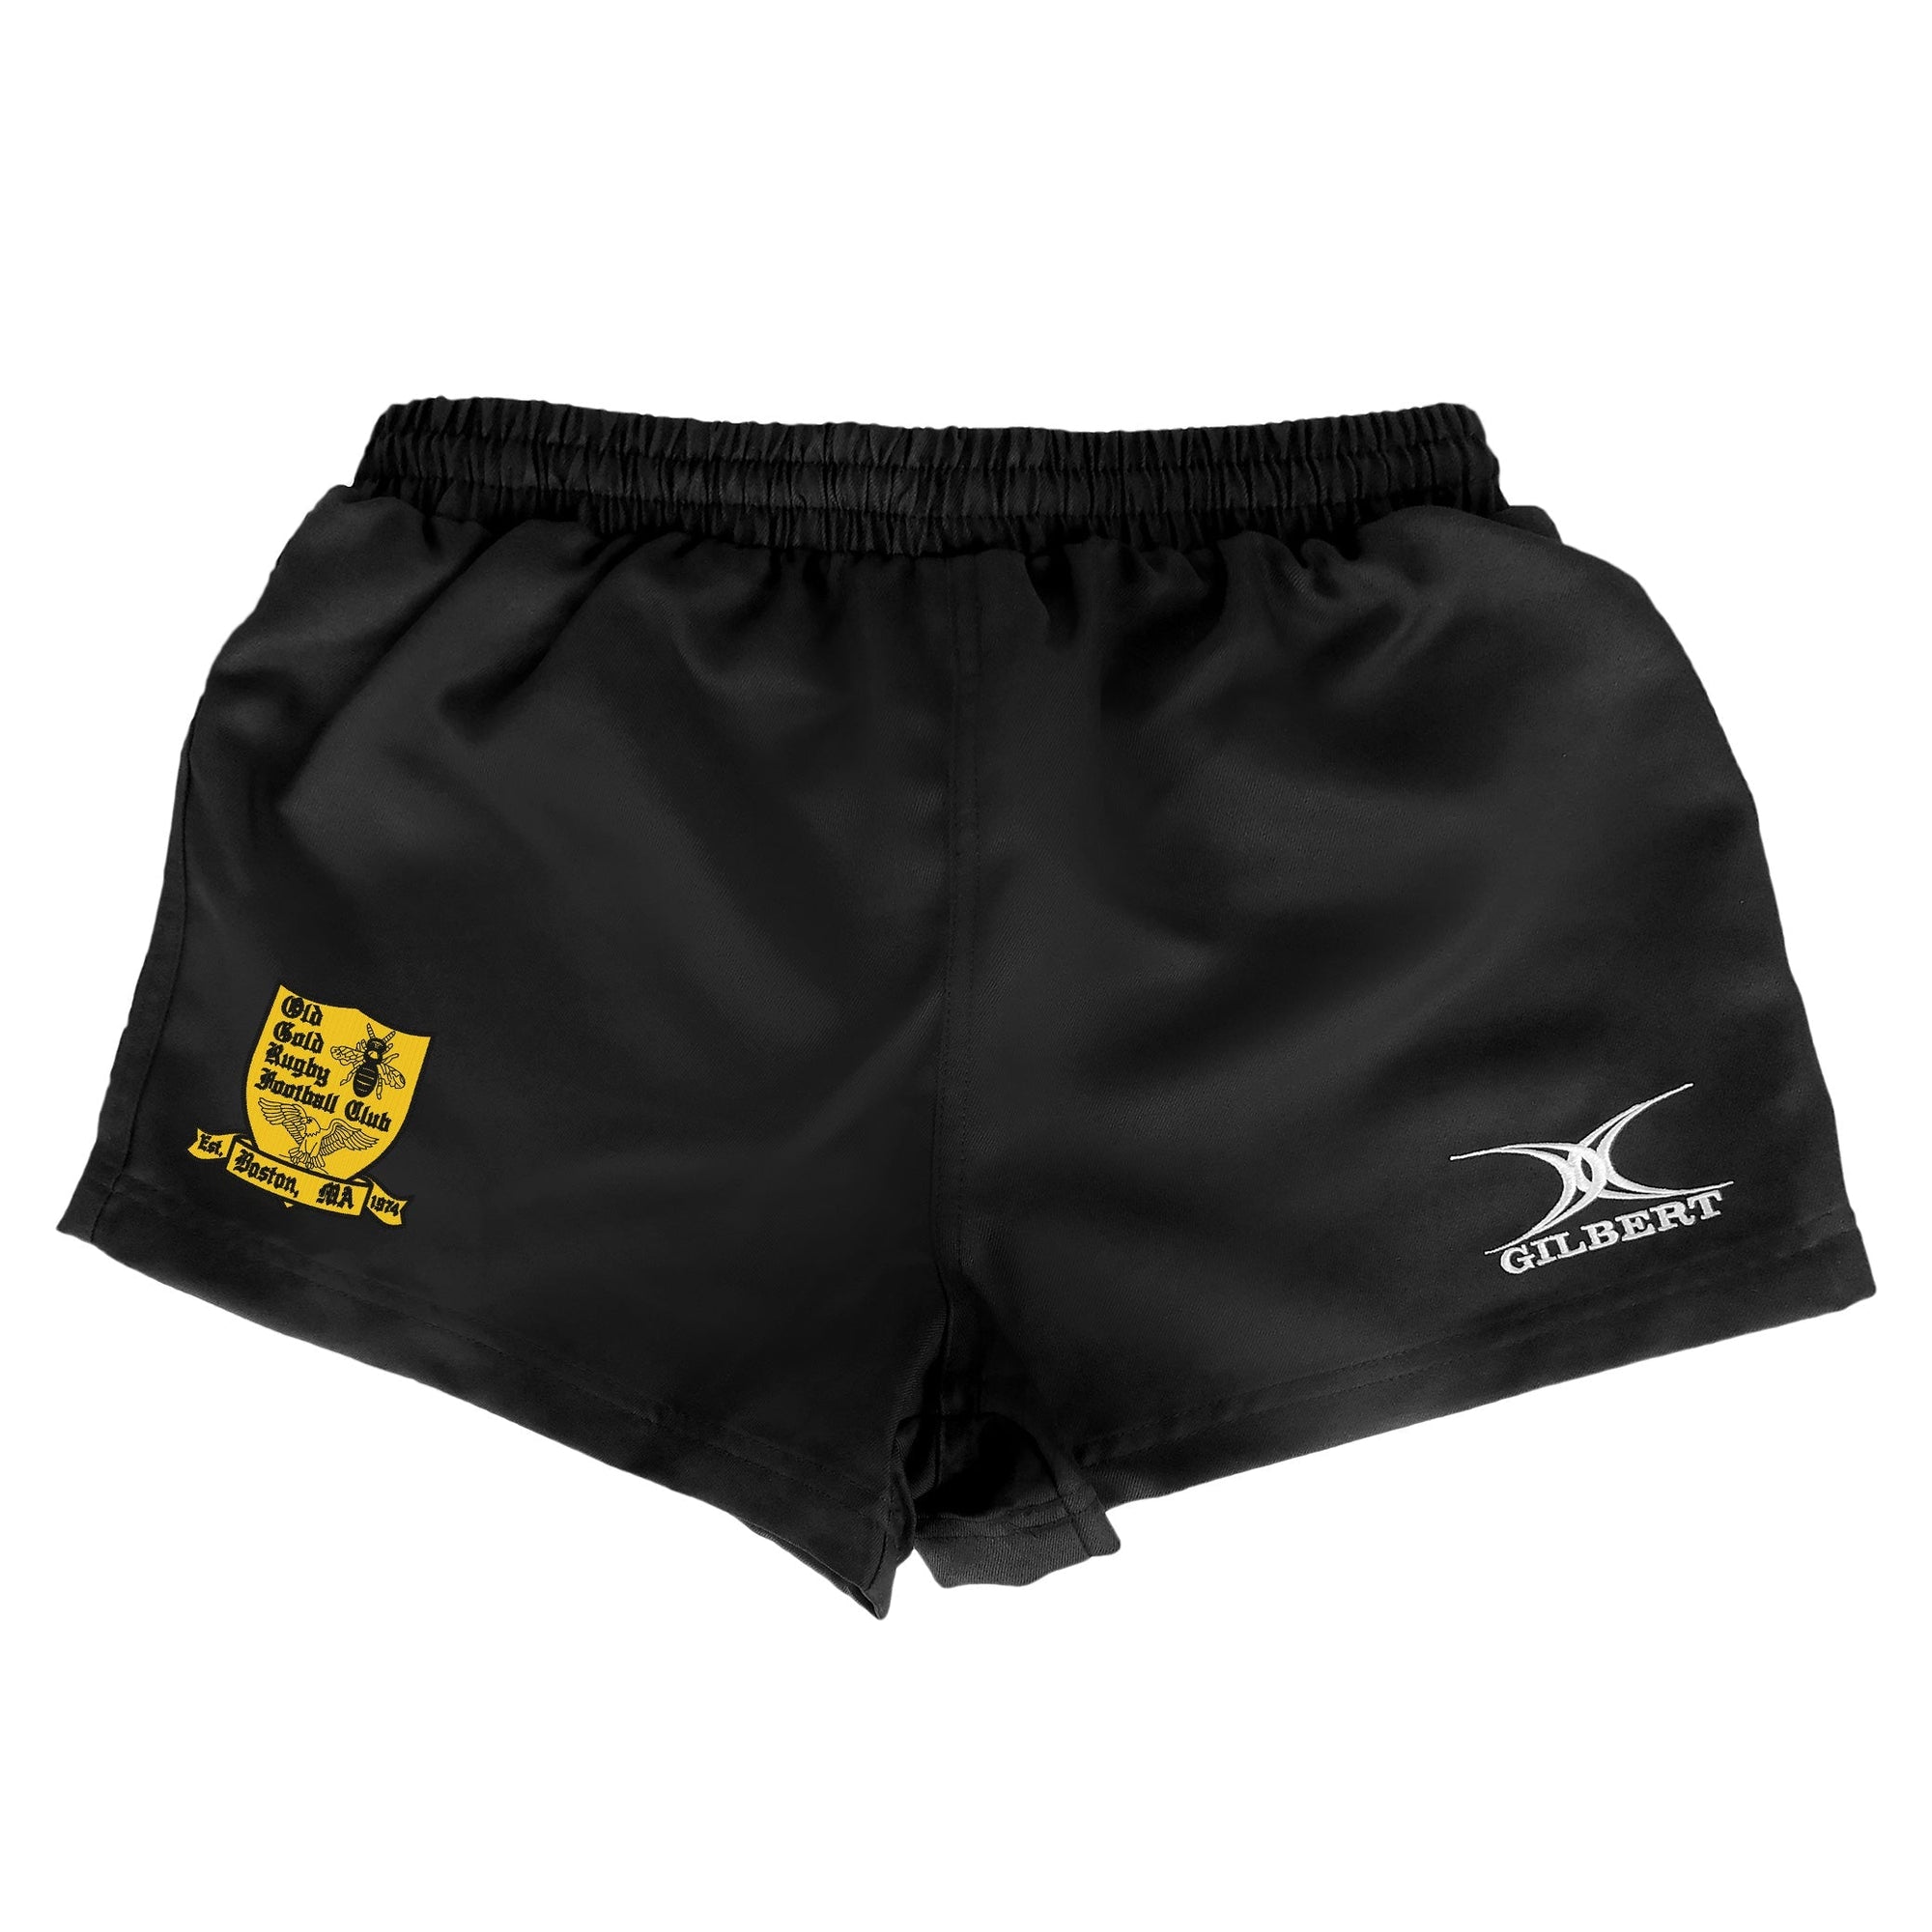 Rugby Imports Old Gold RFC Gilbert Saracen Shorts